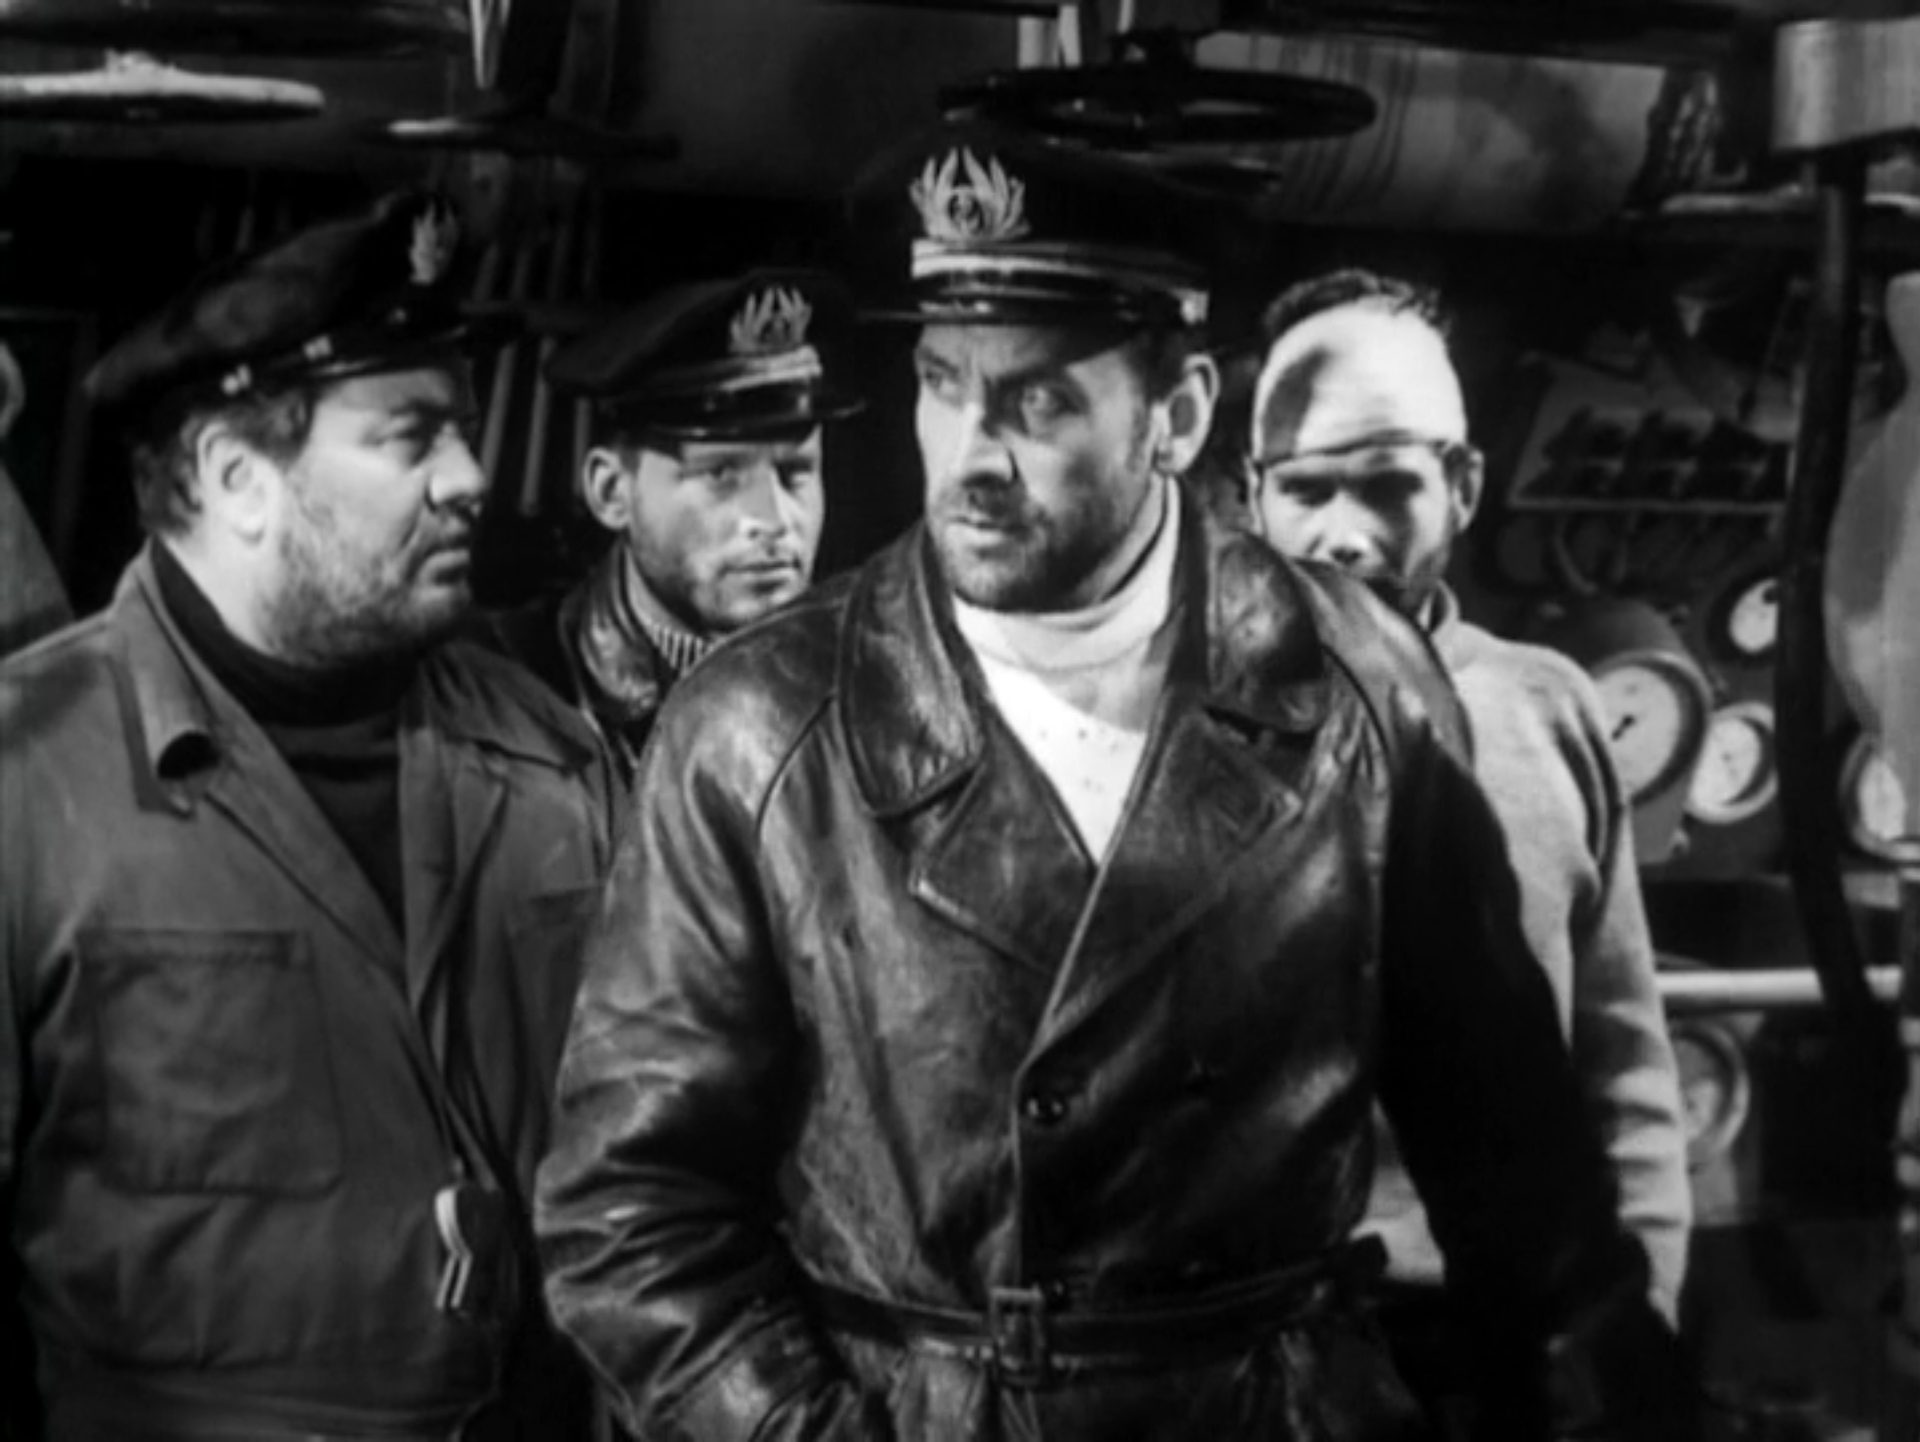 Black and white scene of the sailors cooped up in the sunken submarine; the captain, dressed in a leather coat, looks skeptically to the side, one of the sailors is wearing a white bandage.